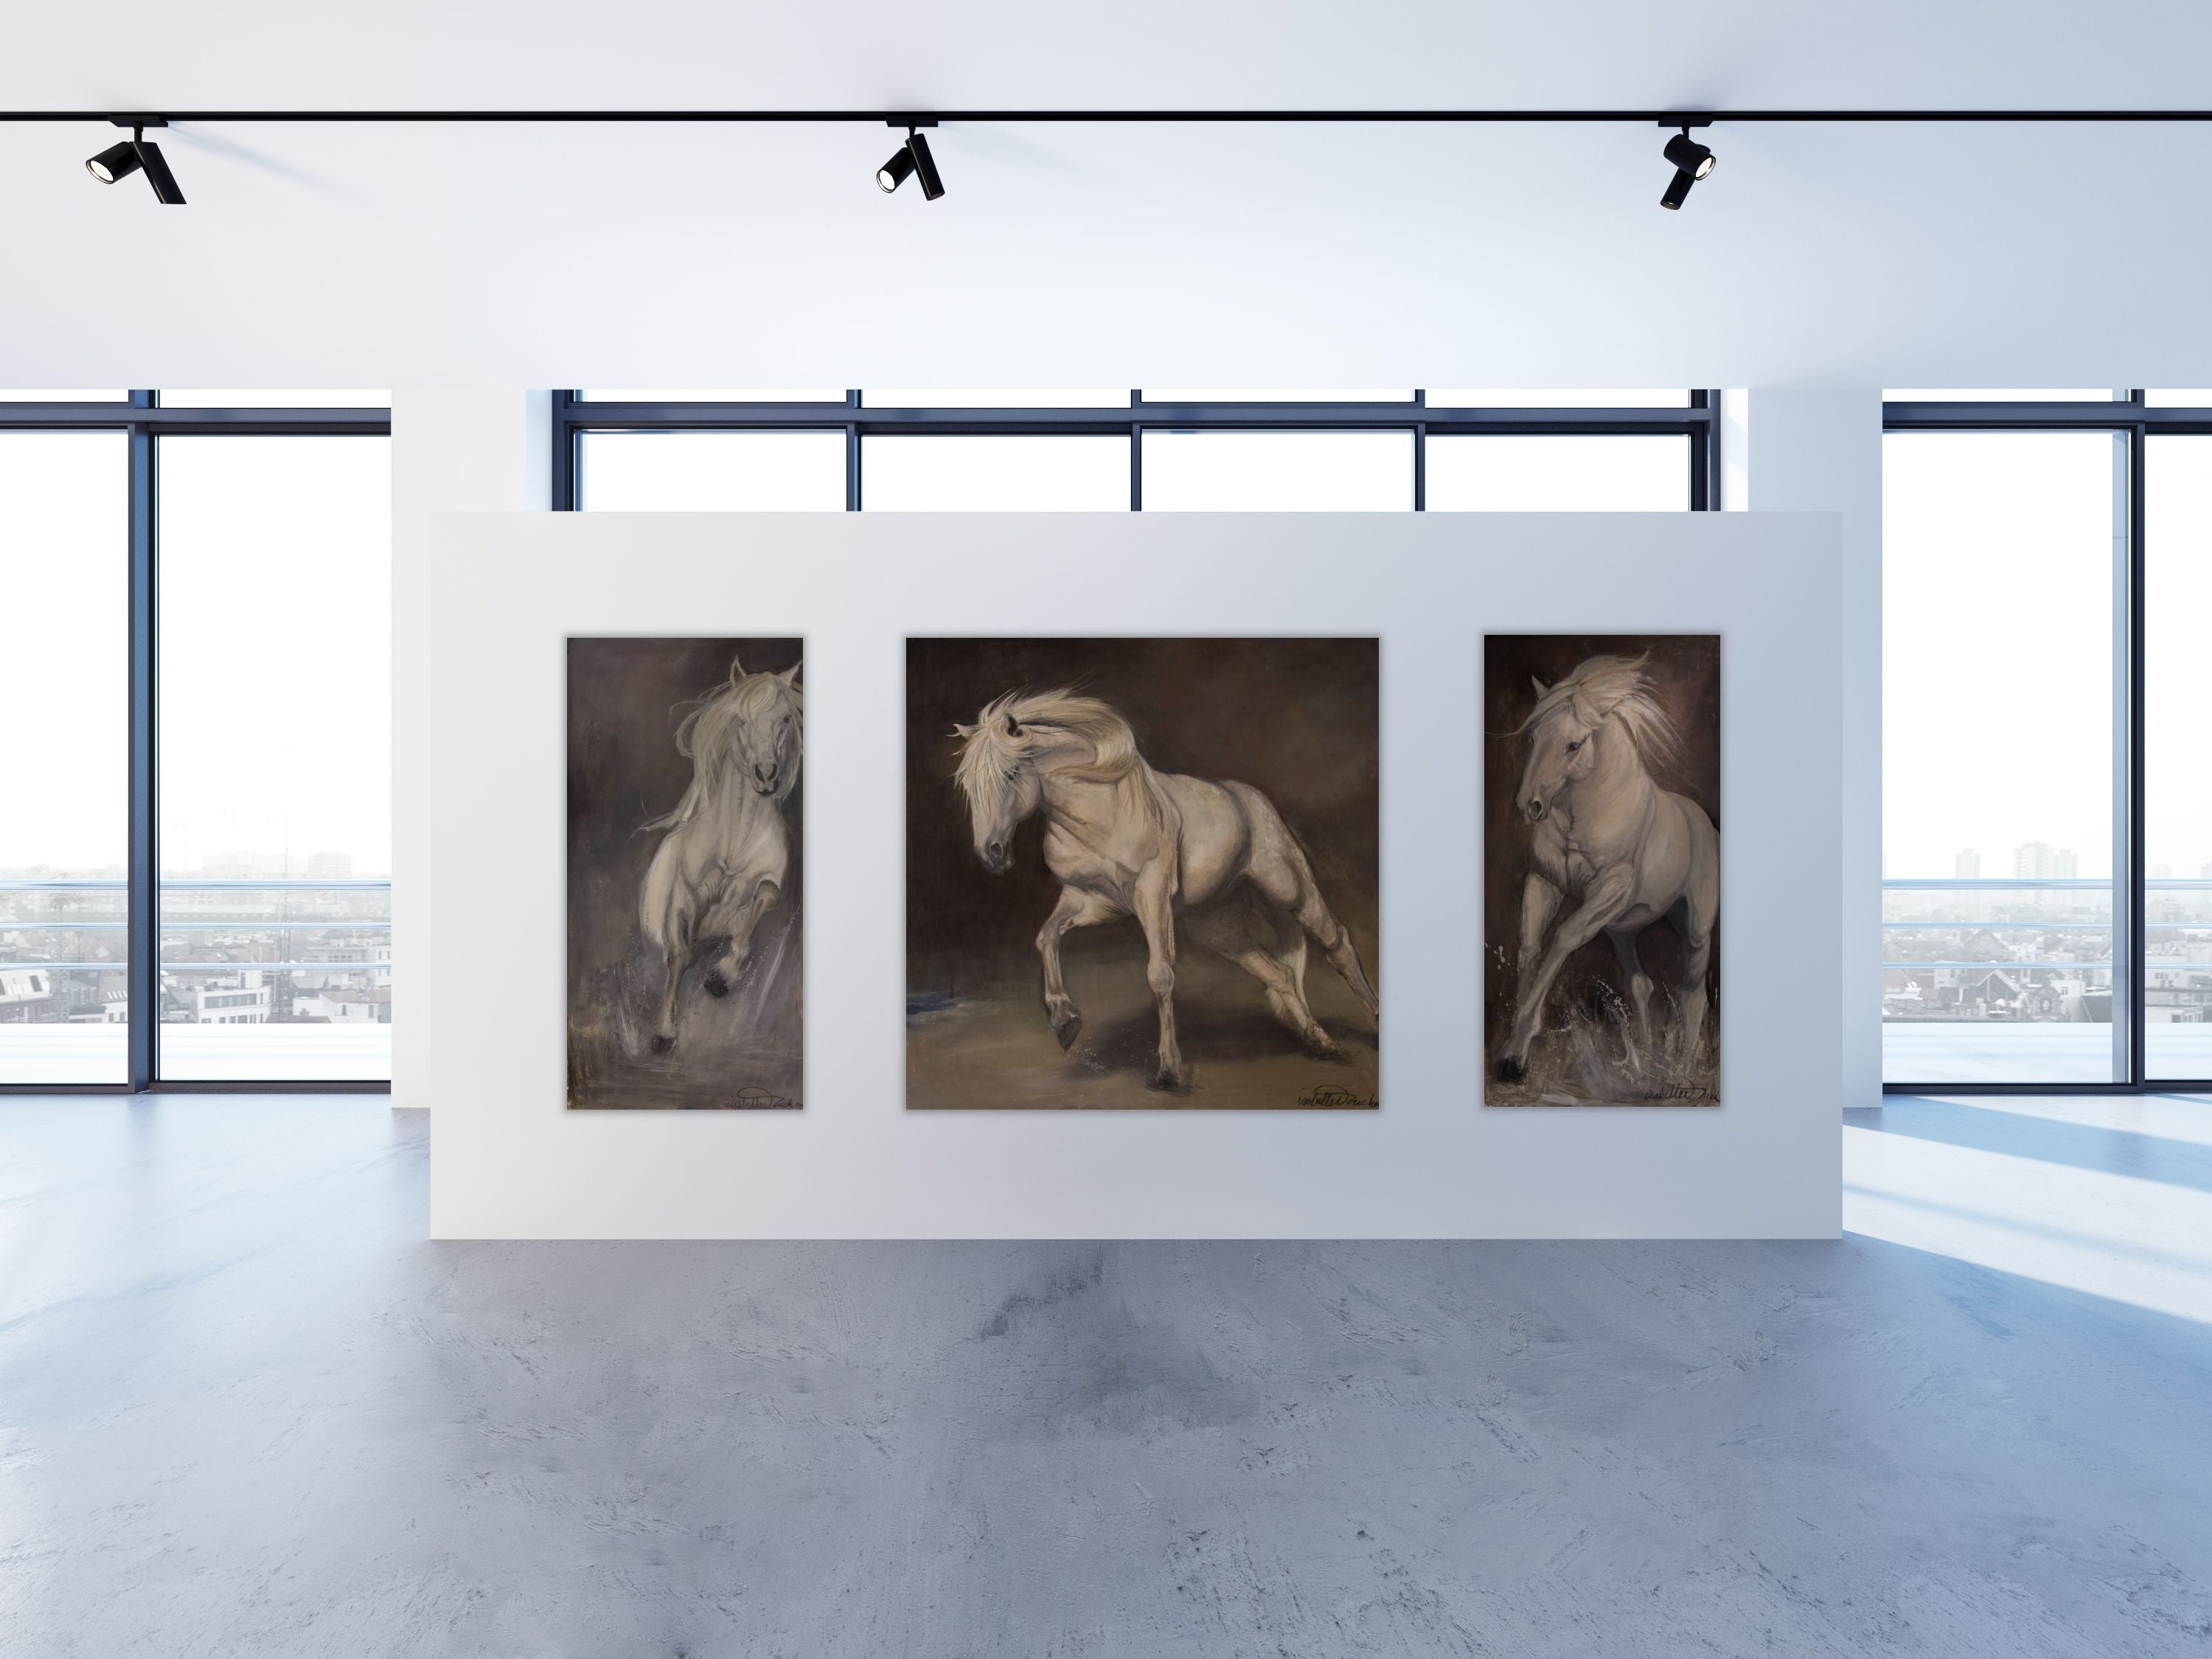 Second in a series of three, Spring Forth, is highly textured and displays the joyful spirit of the Camarguais horse frolicking in his natural environment of the Camargue. 